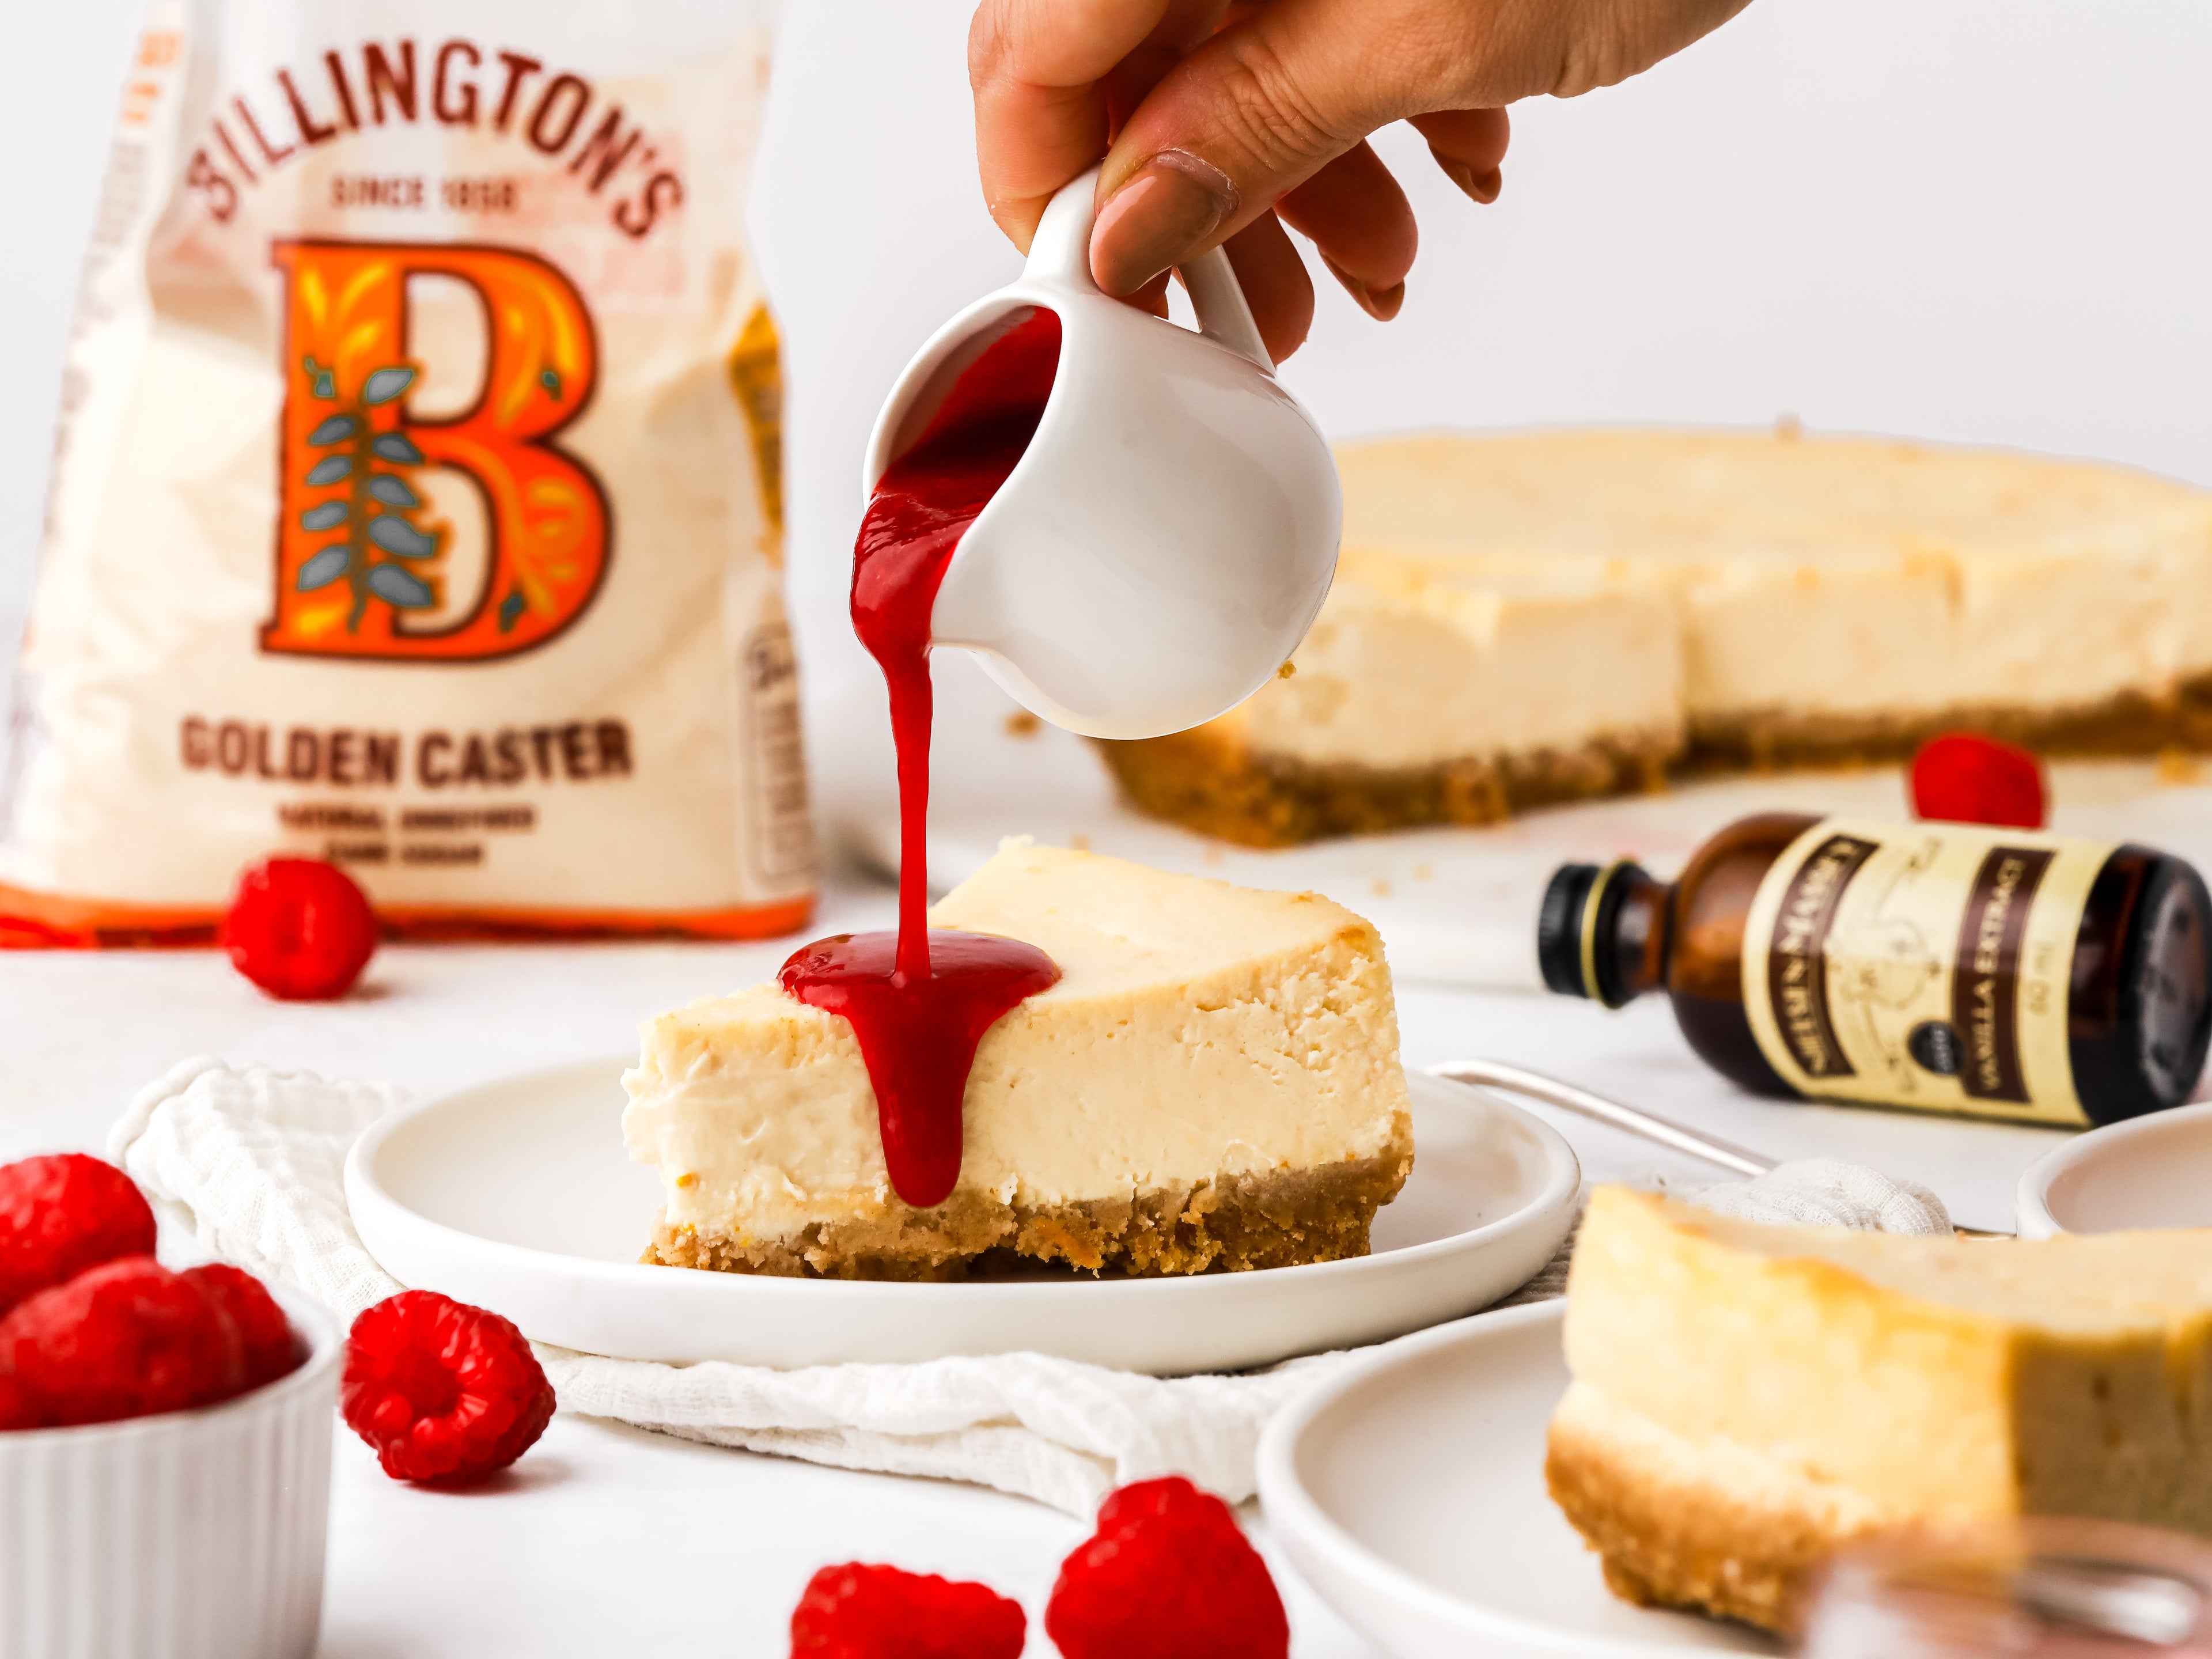 Raspberry sauce being poured on top of a slice of baked cheesecake with sugar pack in background and vanilla bottle on its side